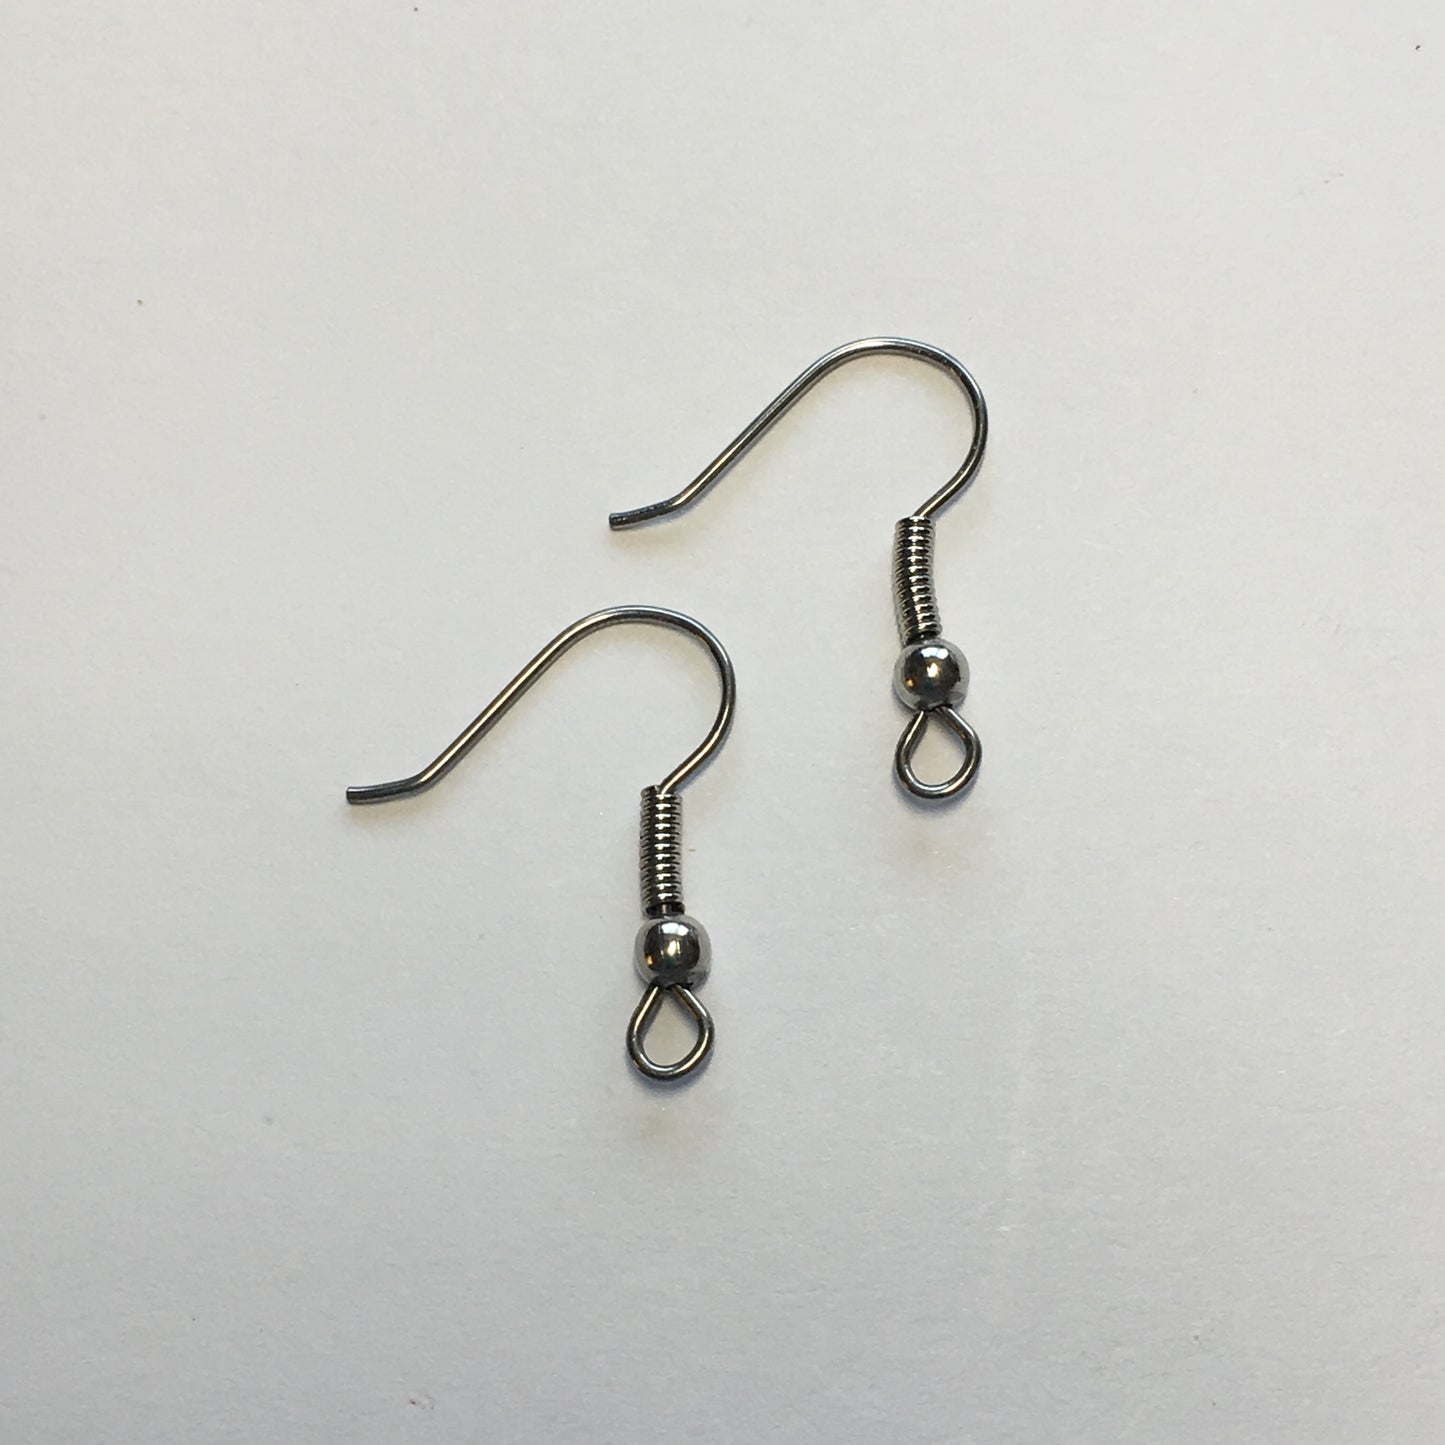 21-Gauge 17 mm Stainless Steel Hypoallergenic French Fish Hook Ear Wires - 1 or 5 Pair